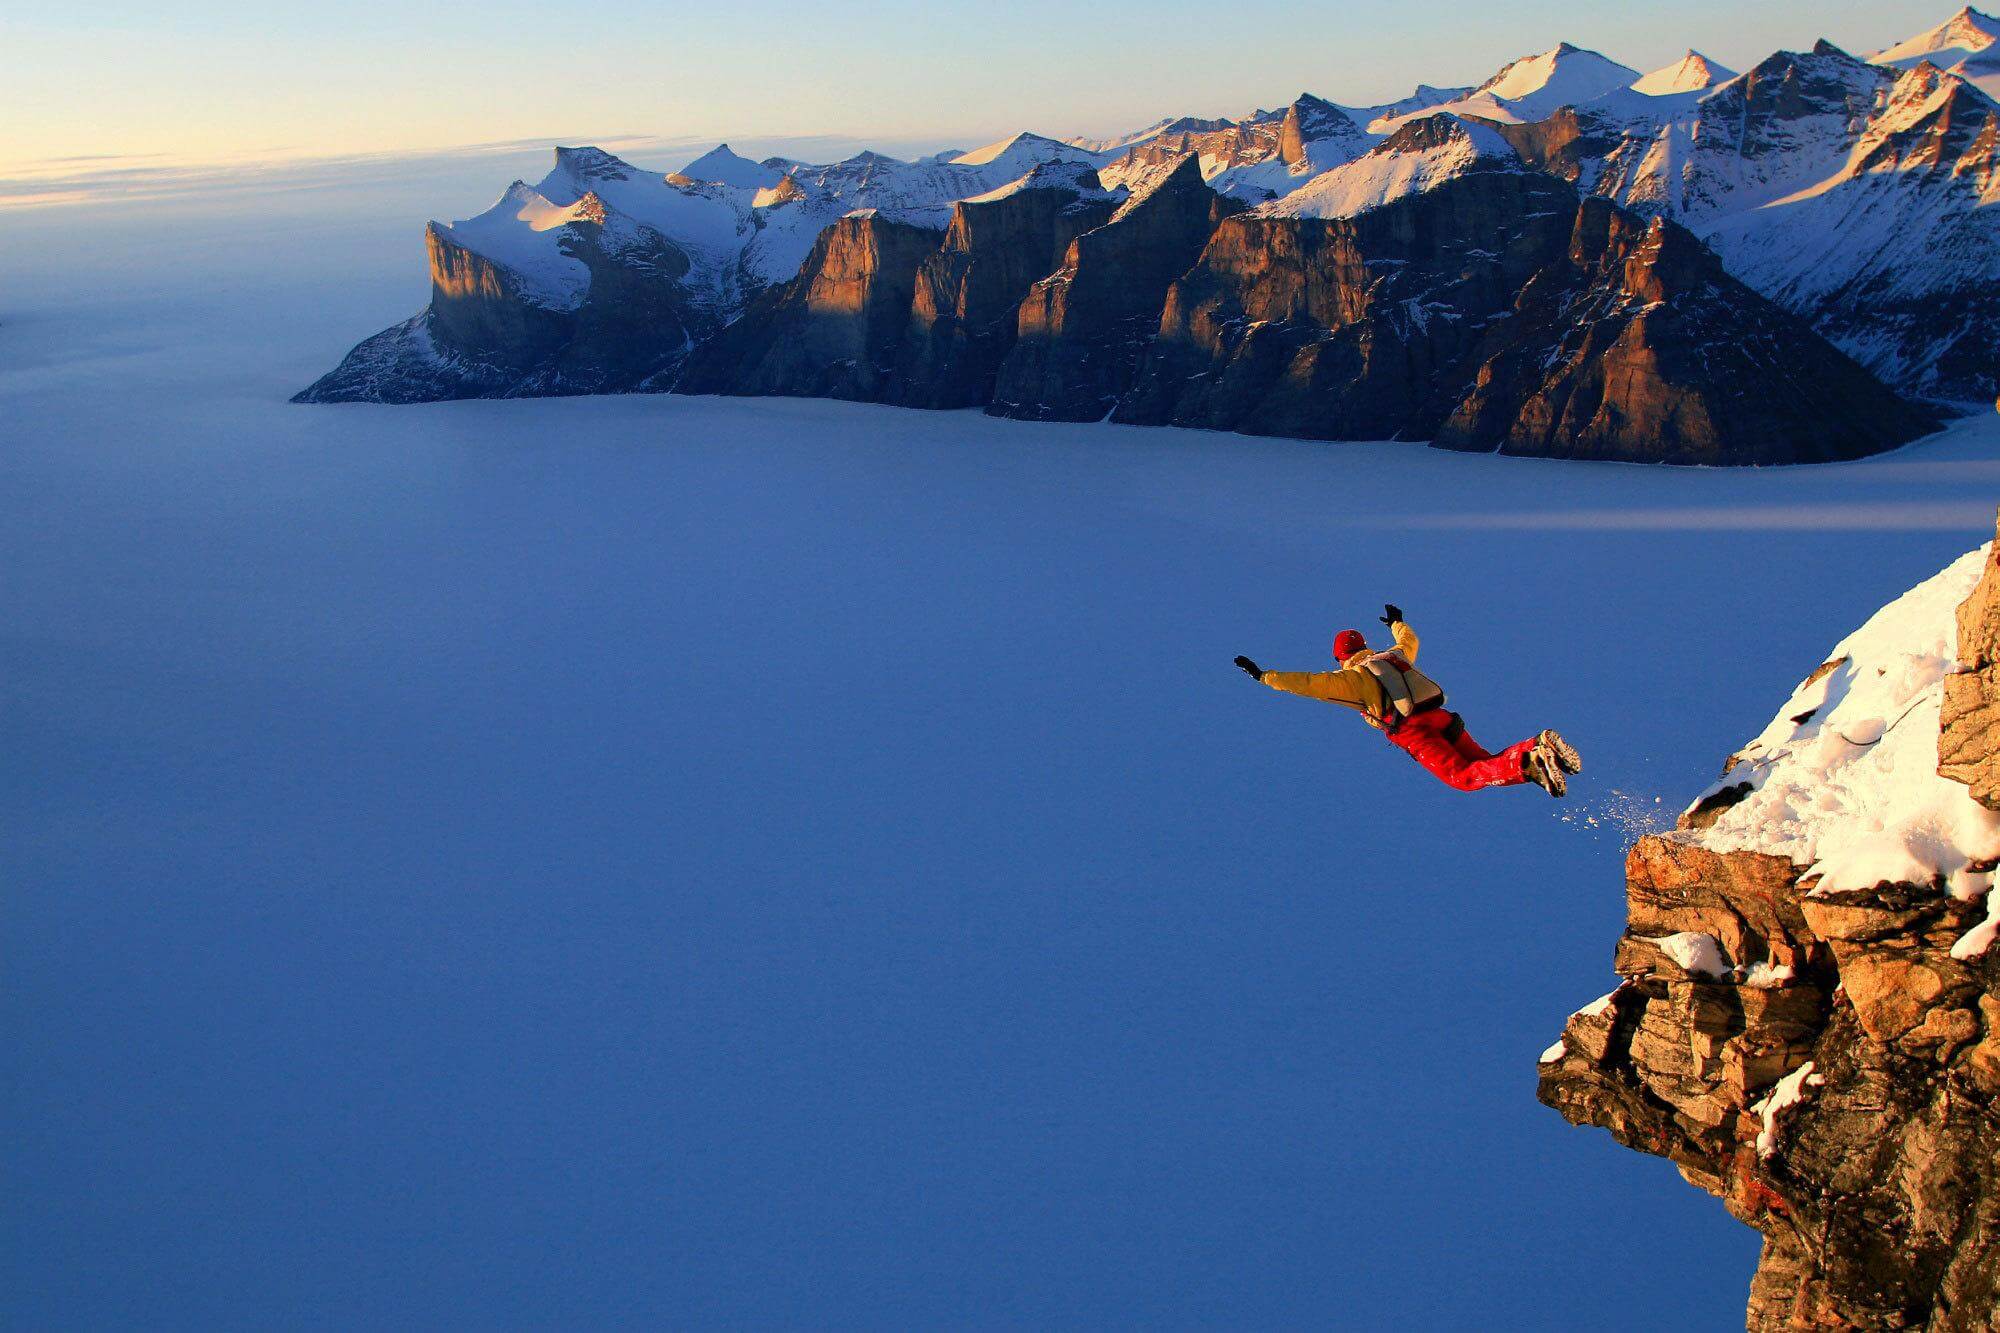 Entrepreneurship is jumping off a cliff